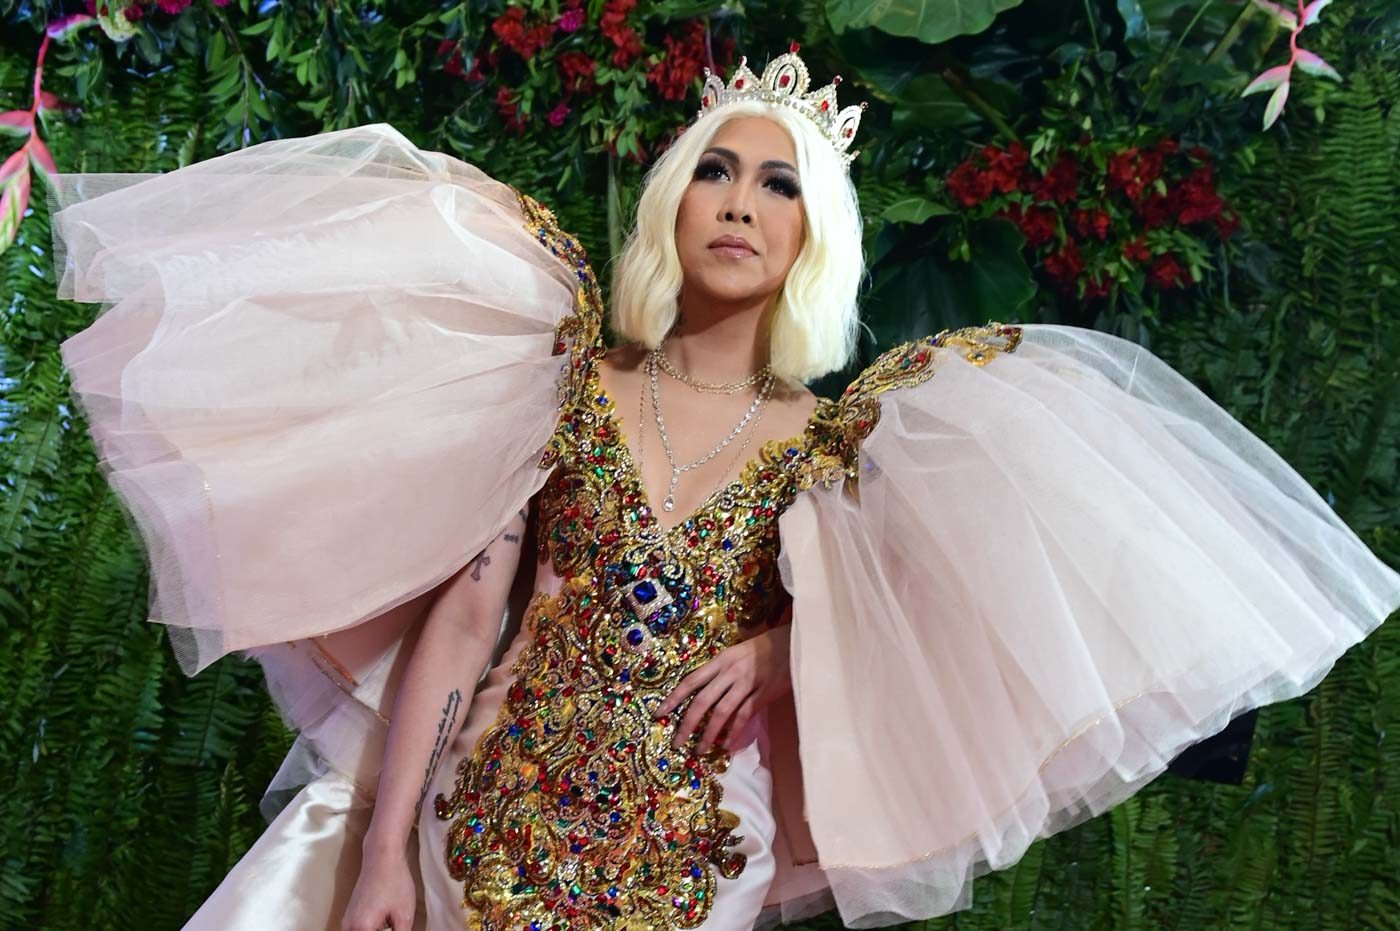 Vice Ganda on return of ‘It’s Showtime’ to free TV: ‘Better days’